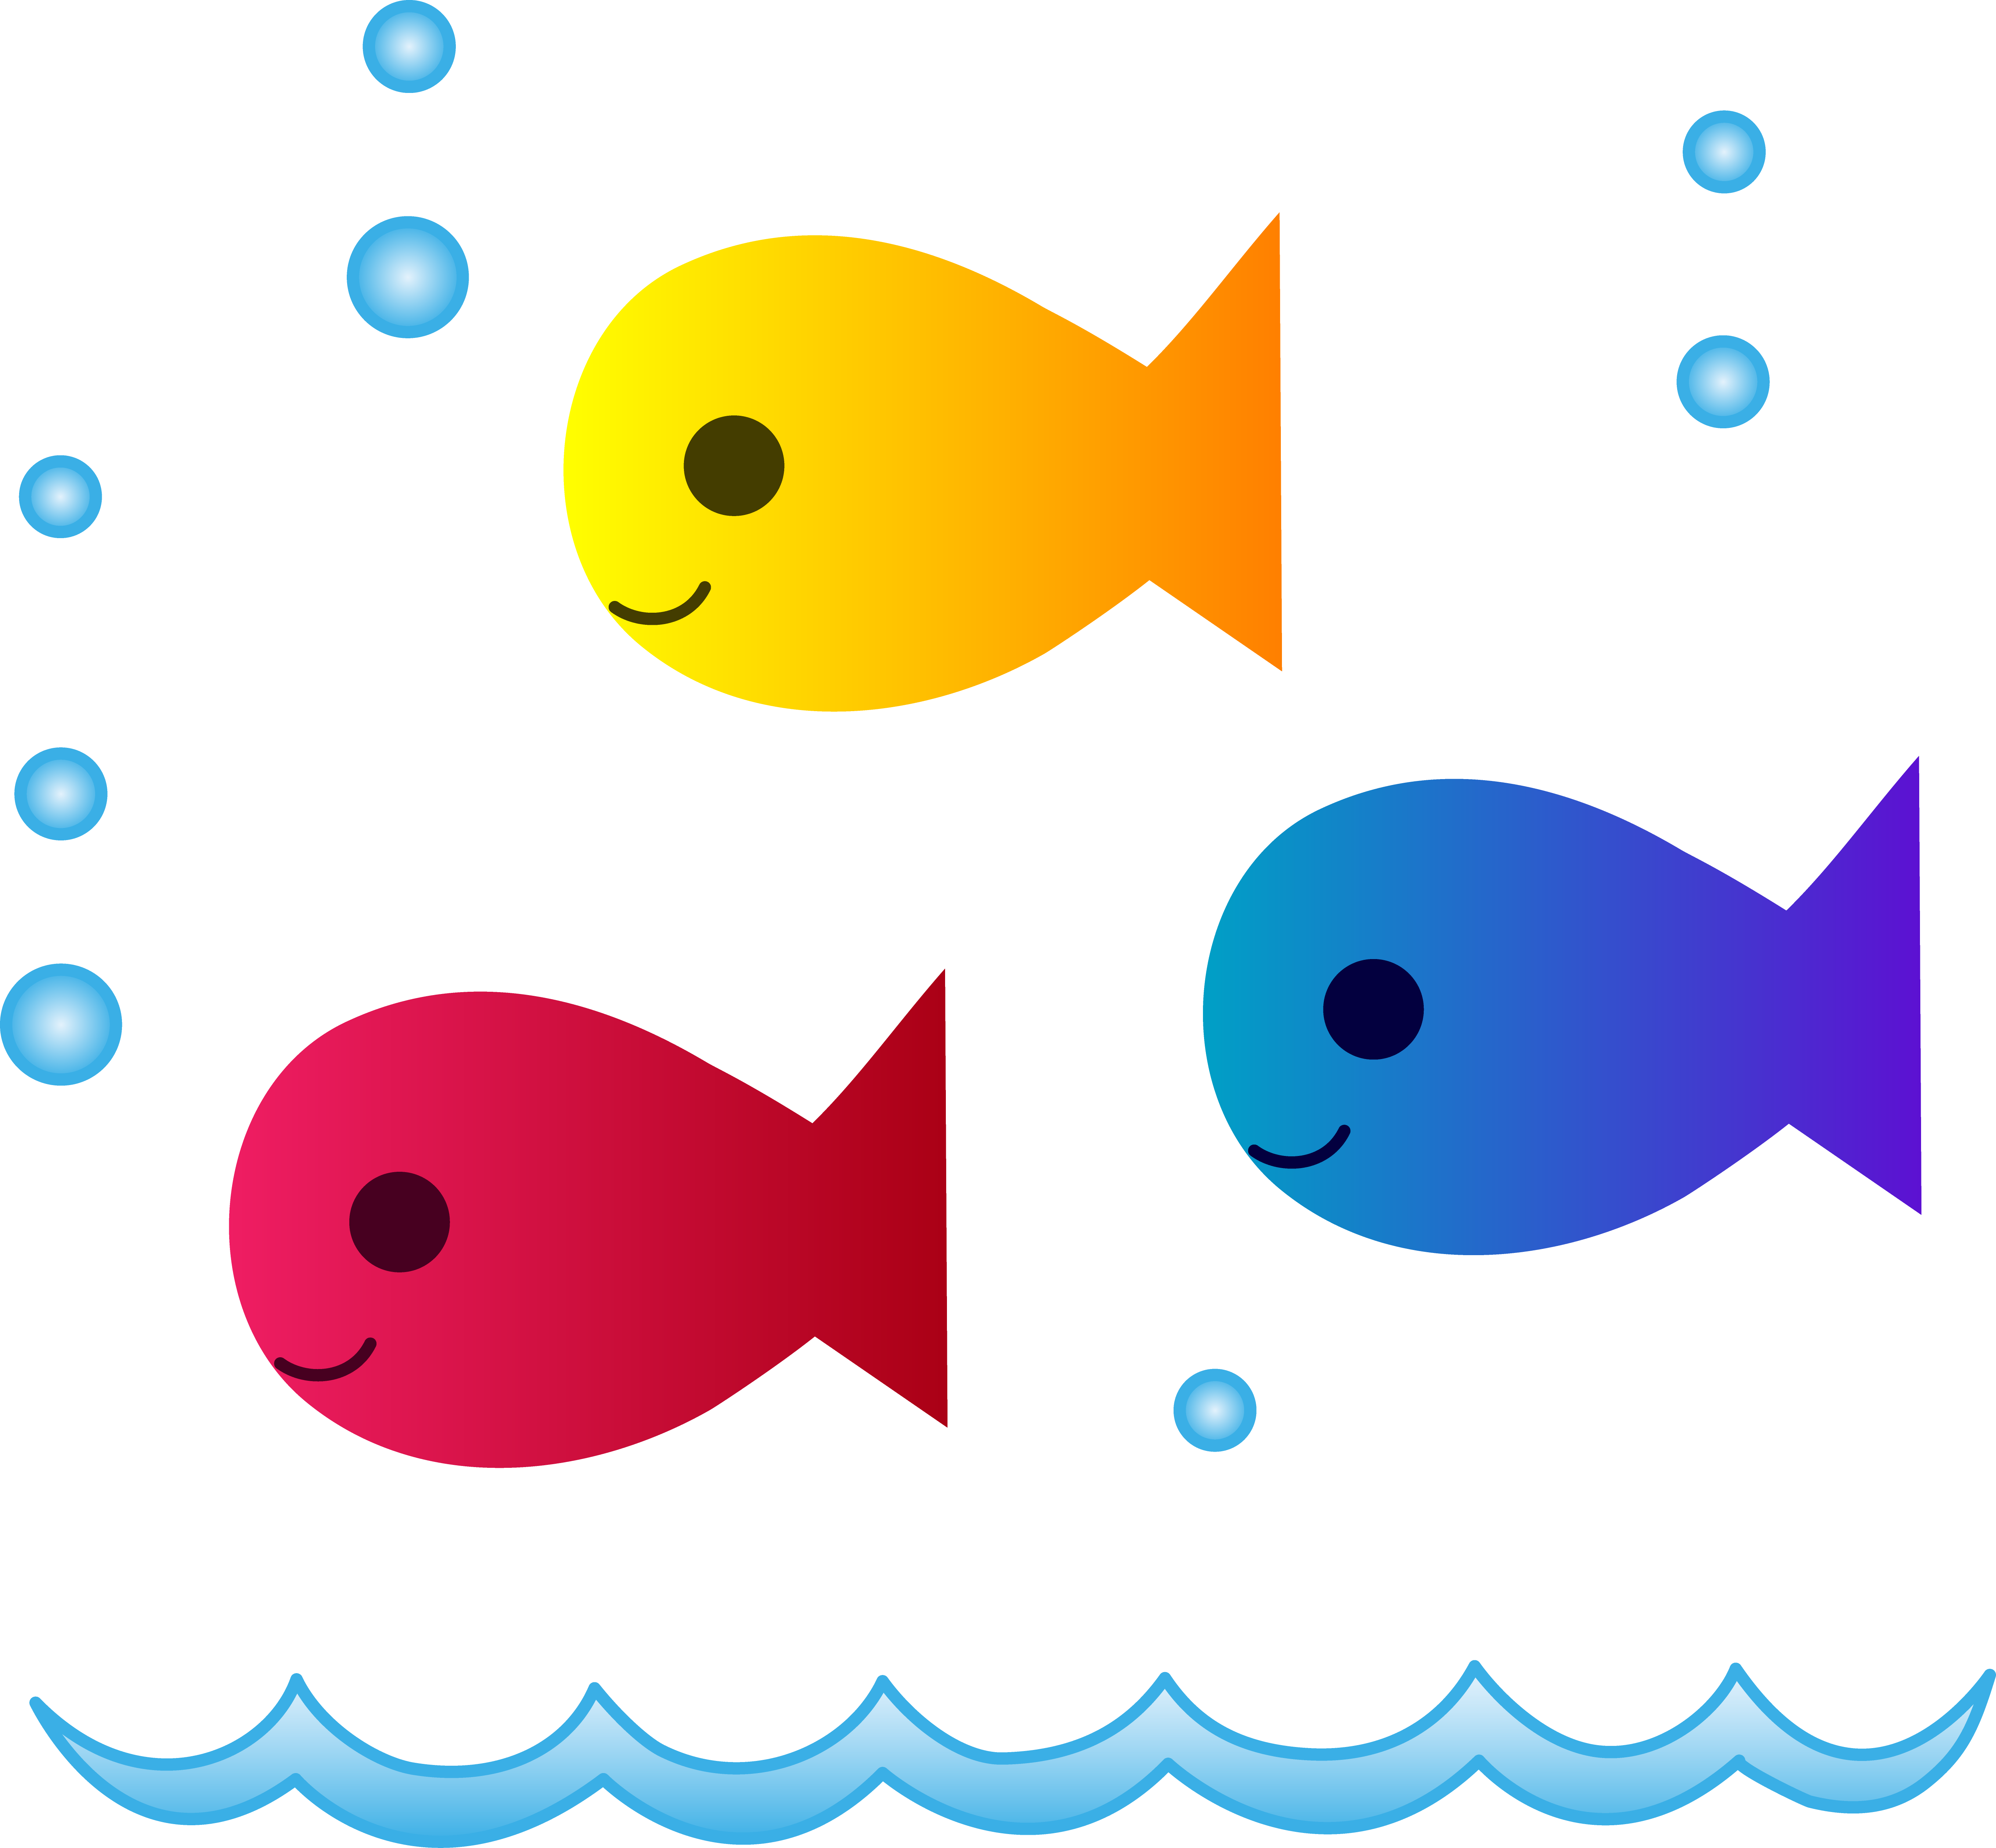 Clipart Fish Outline | Clipart library - Free Clipart Images